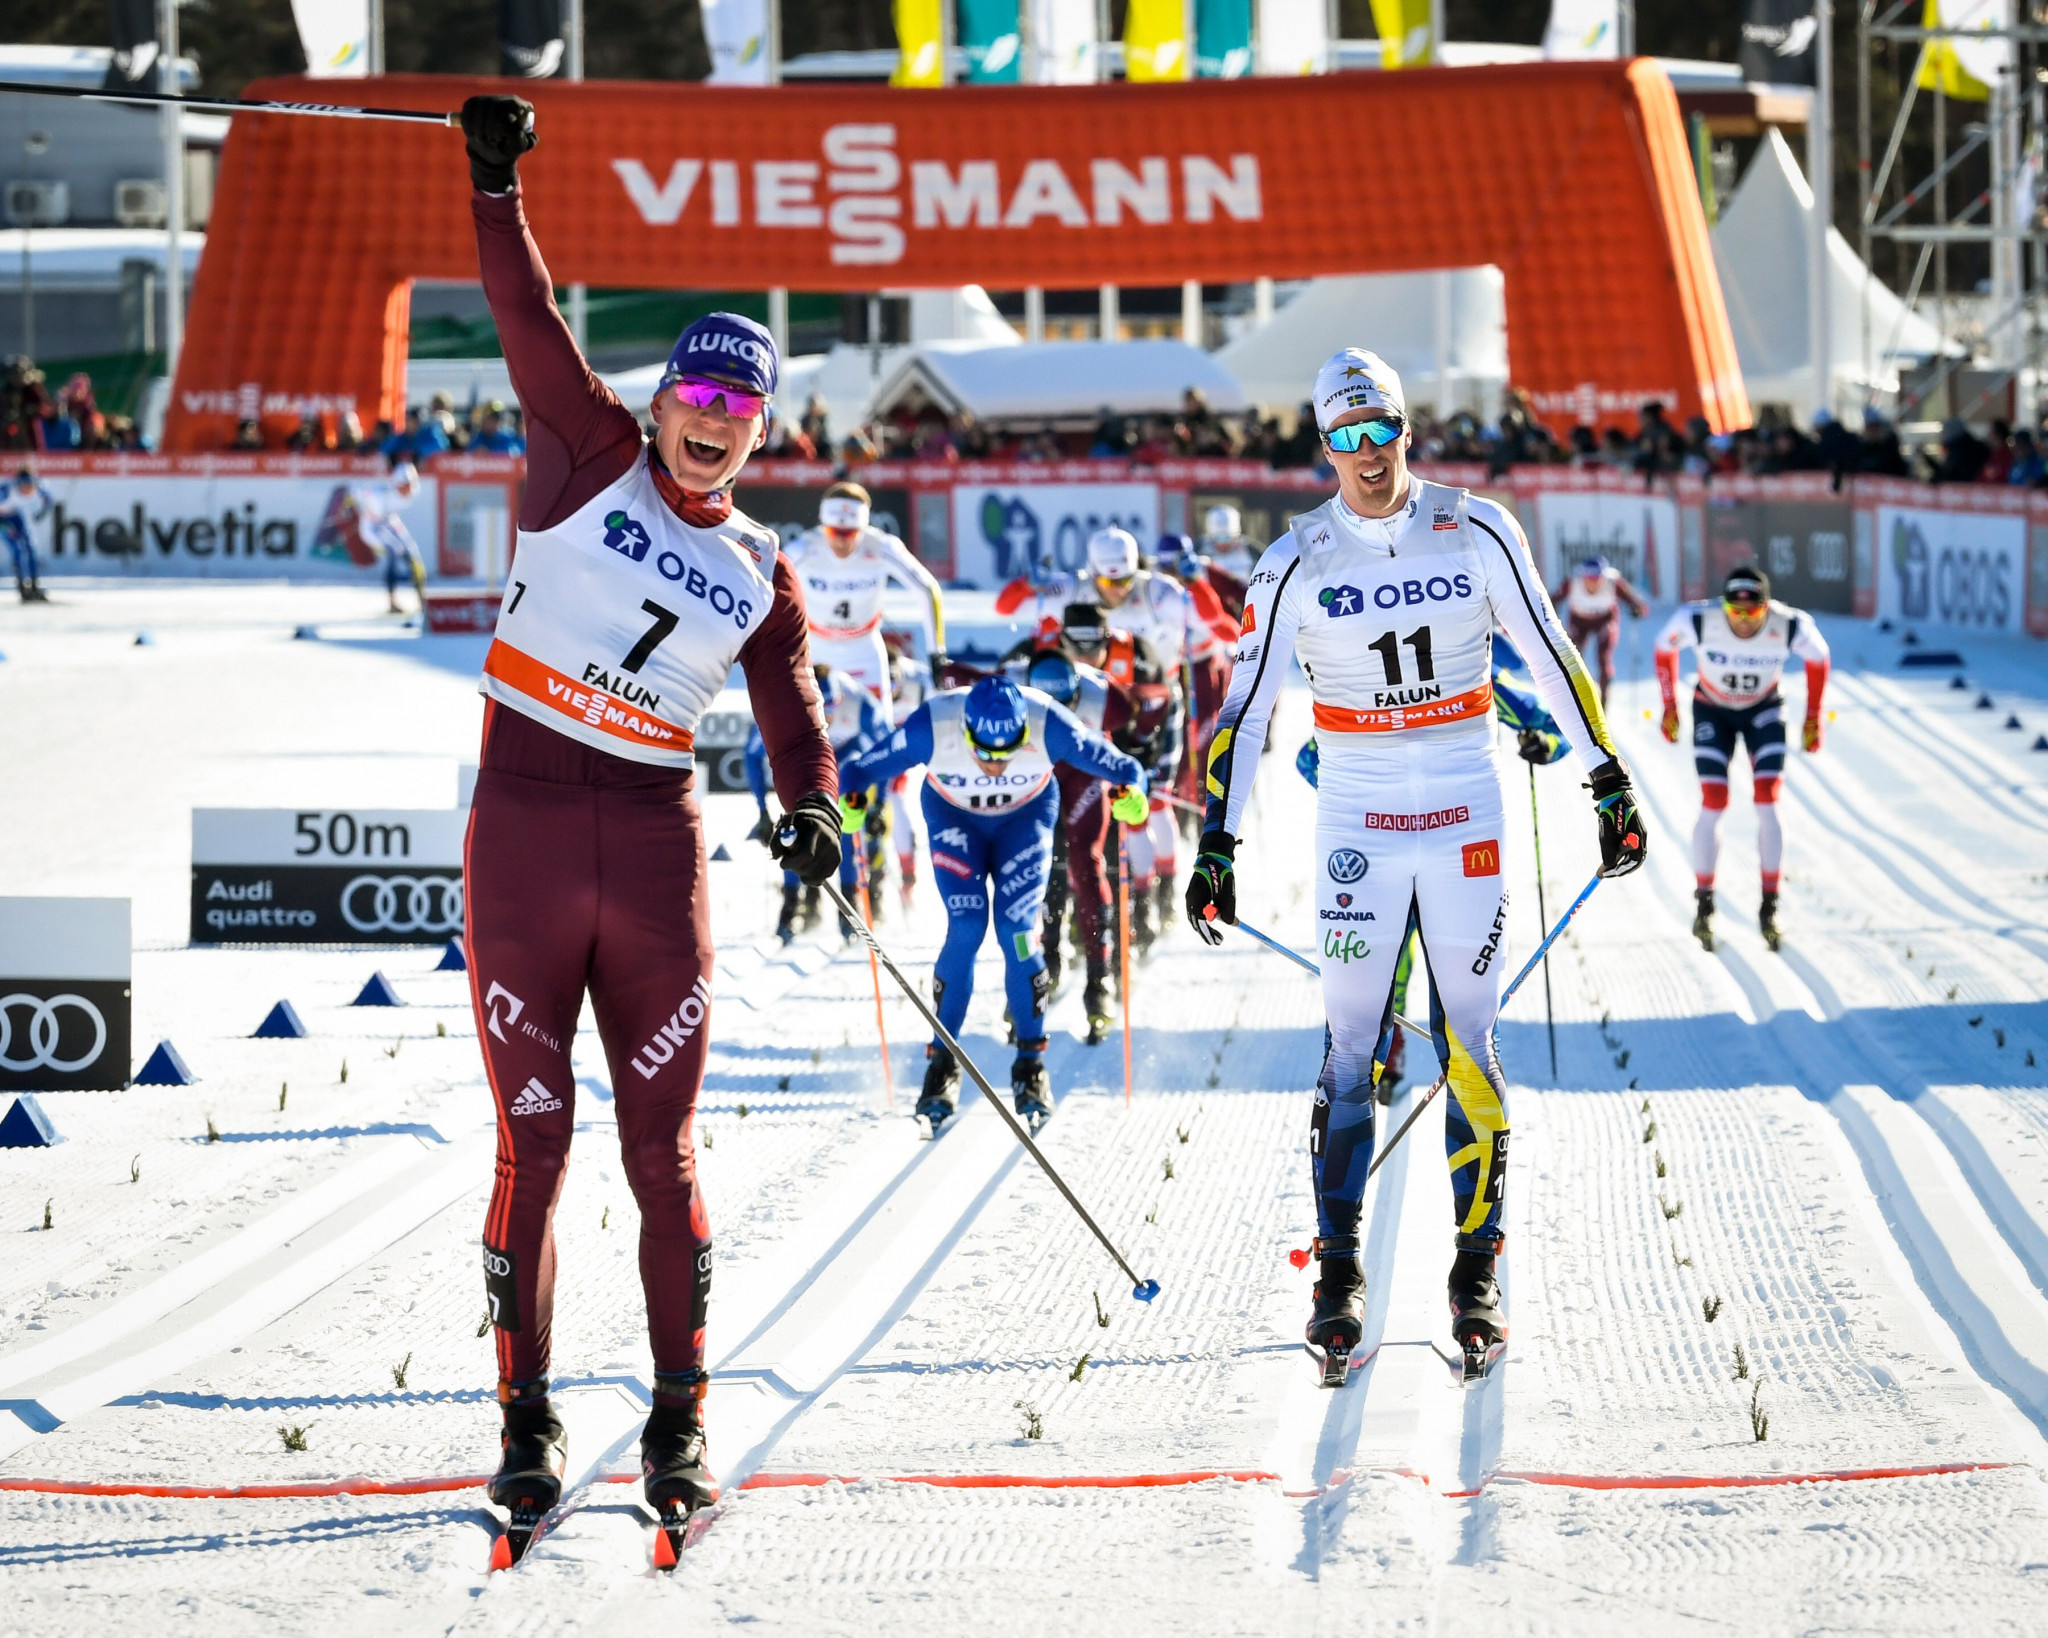 Viessmann had served as general sponsor for the FIS Cross Country World Cup ©Getty Images